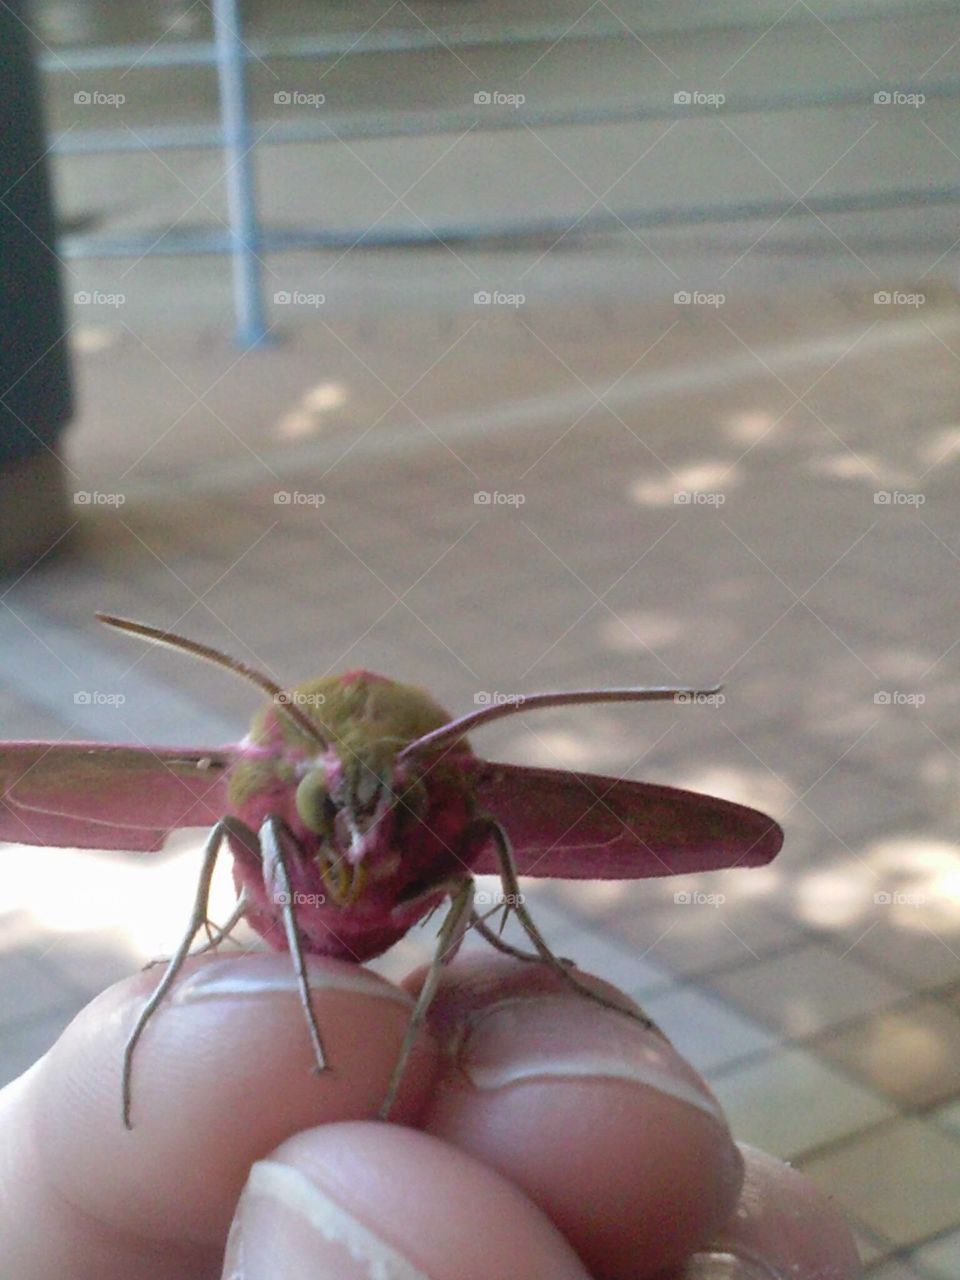 First time seeing a pink moth, cool.